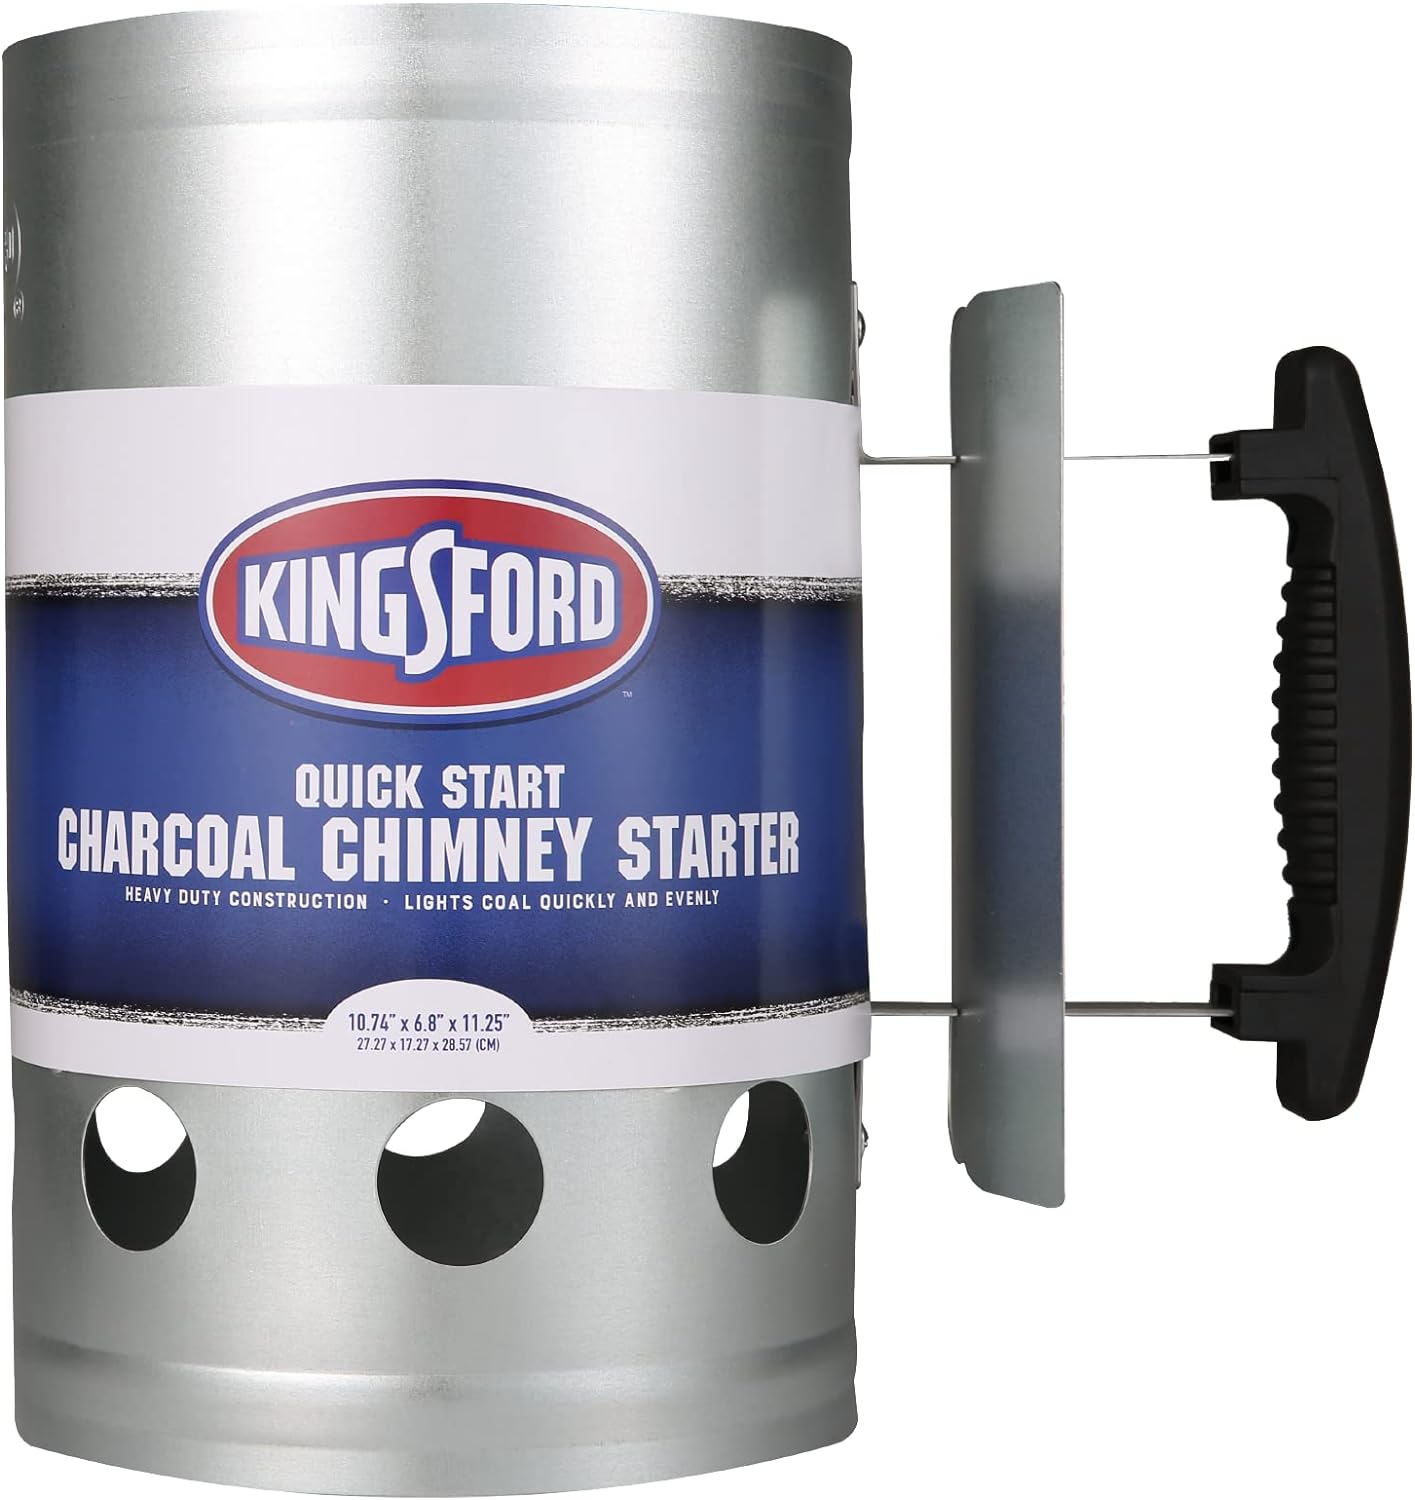 KINGSFORD Heavy Duty Deluxe Charcoal Chimney Starter | BBQ Chimney Starter for Charcoal Grill and Barbecues, Compact Easy to Use Chimney Starters and BBQ Grill Tools, Silver